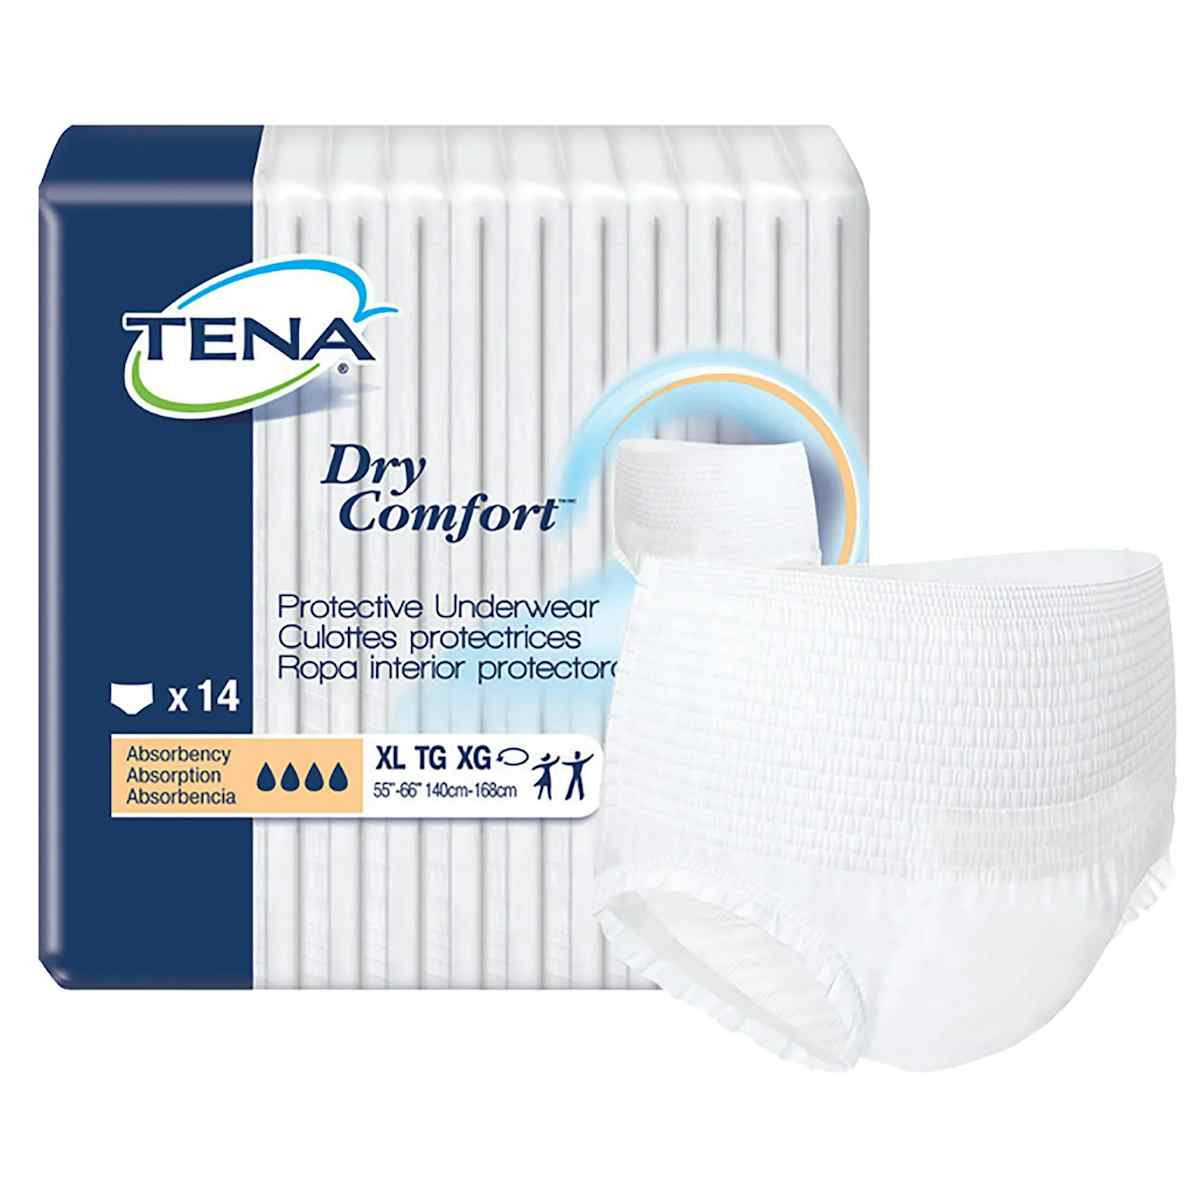 TENA Dry Comfort Protective Pull-Up Underwear, Moderate | Carewell